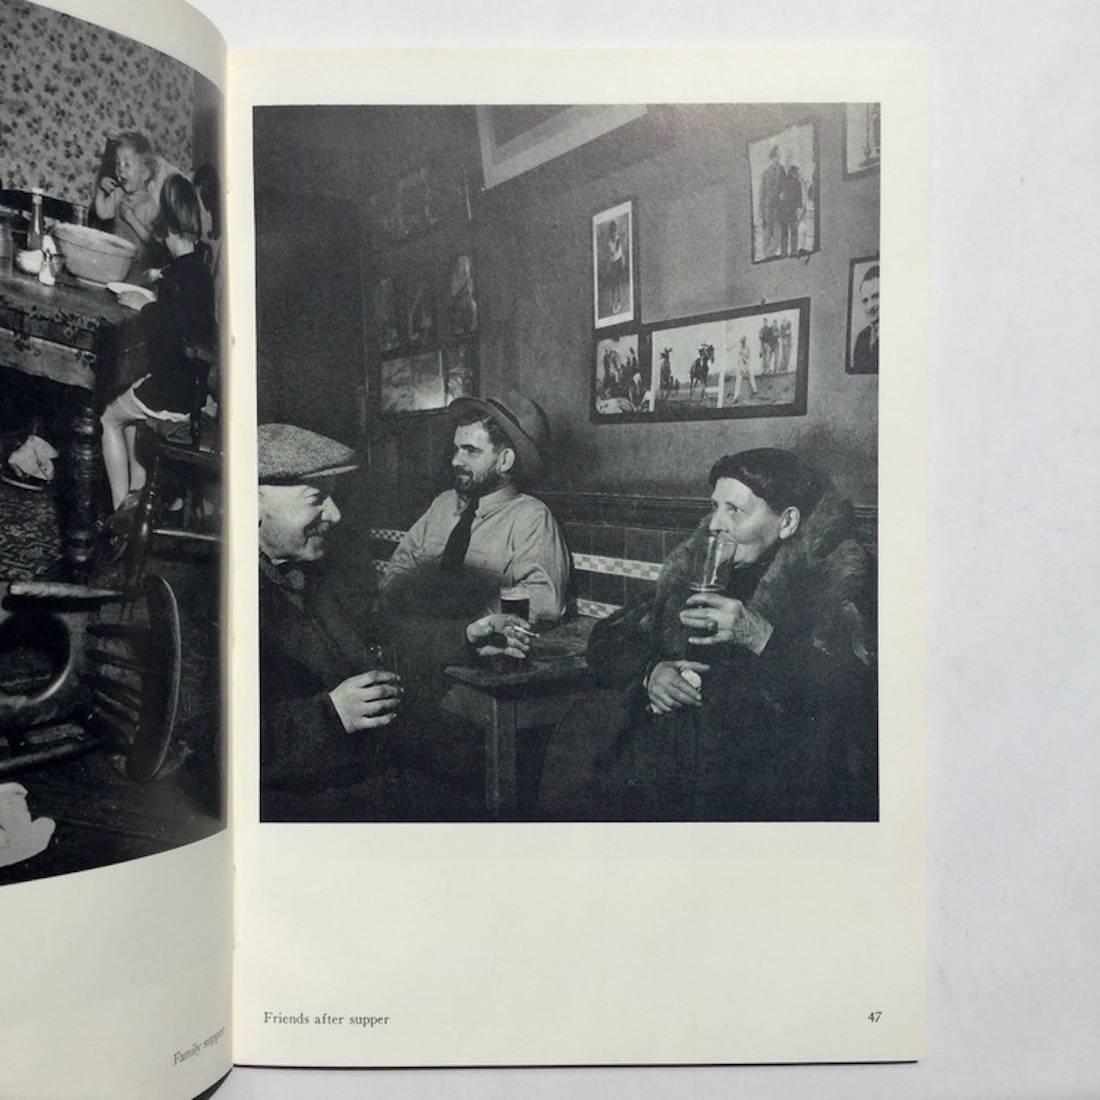 First edition, first printing, The Focal Press, 1948.

A wonderful publication of Brandt's work in the sought-after Focal Press series. Brandt's photographs show a London that has long since disappeared, much of the architecture may still remain,